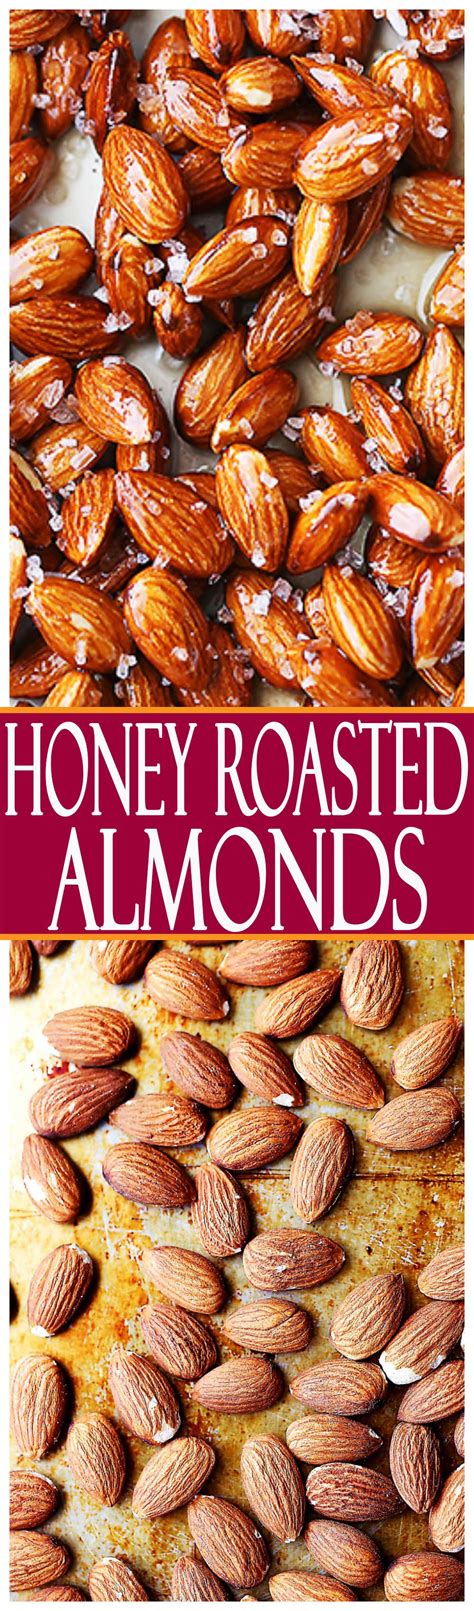 Honey Roasted Almonds Simple Festive Healthy And Delicious Almonds